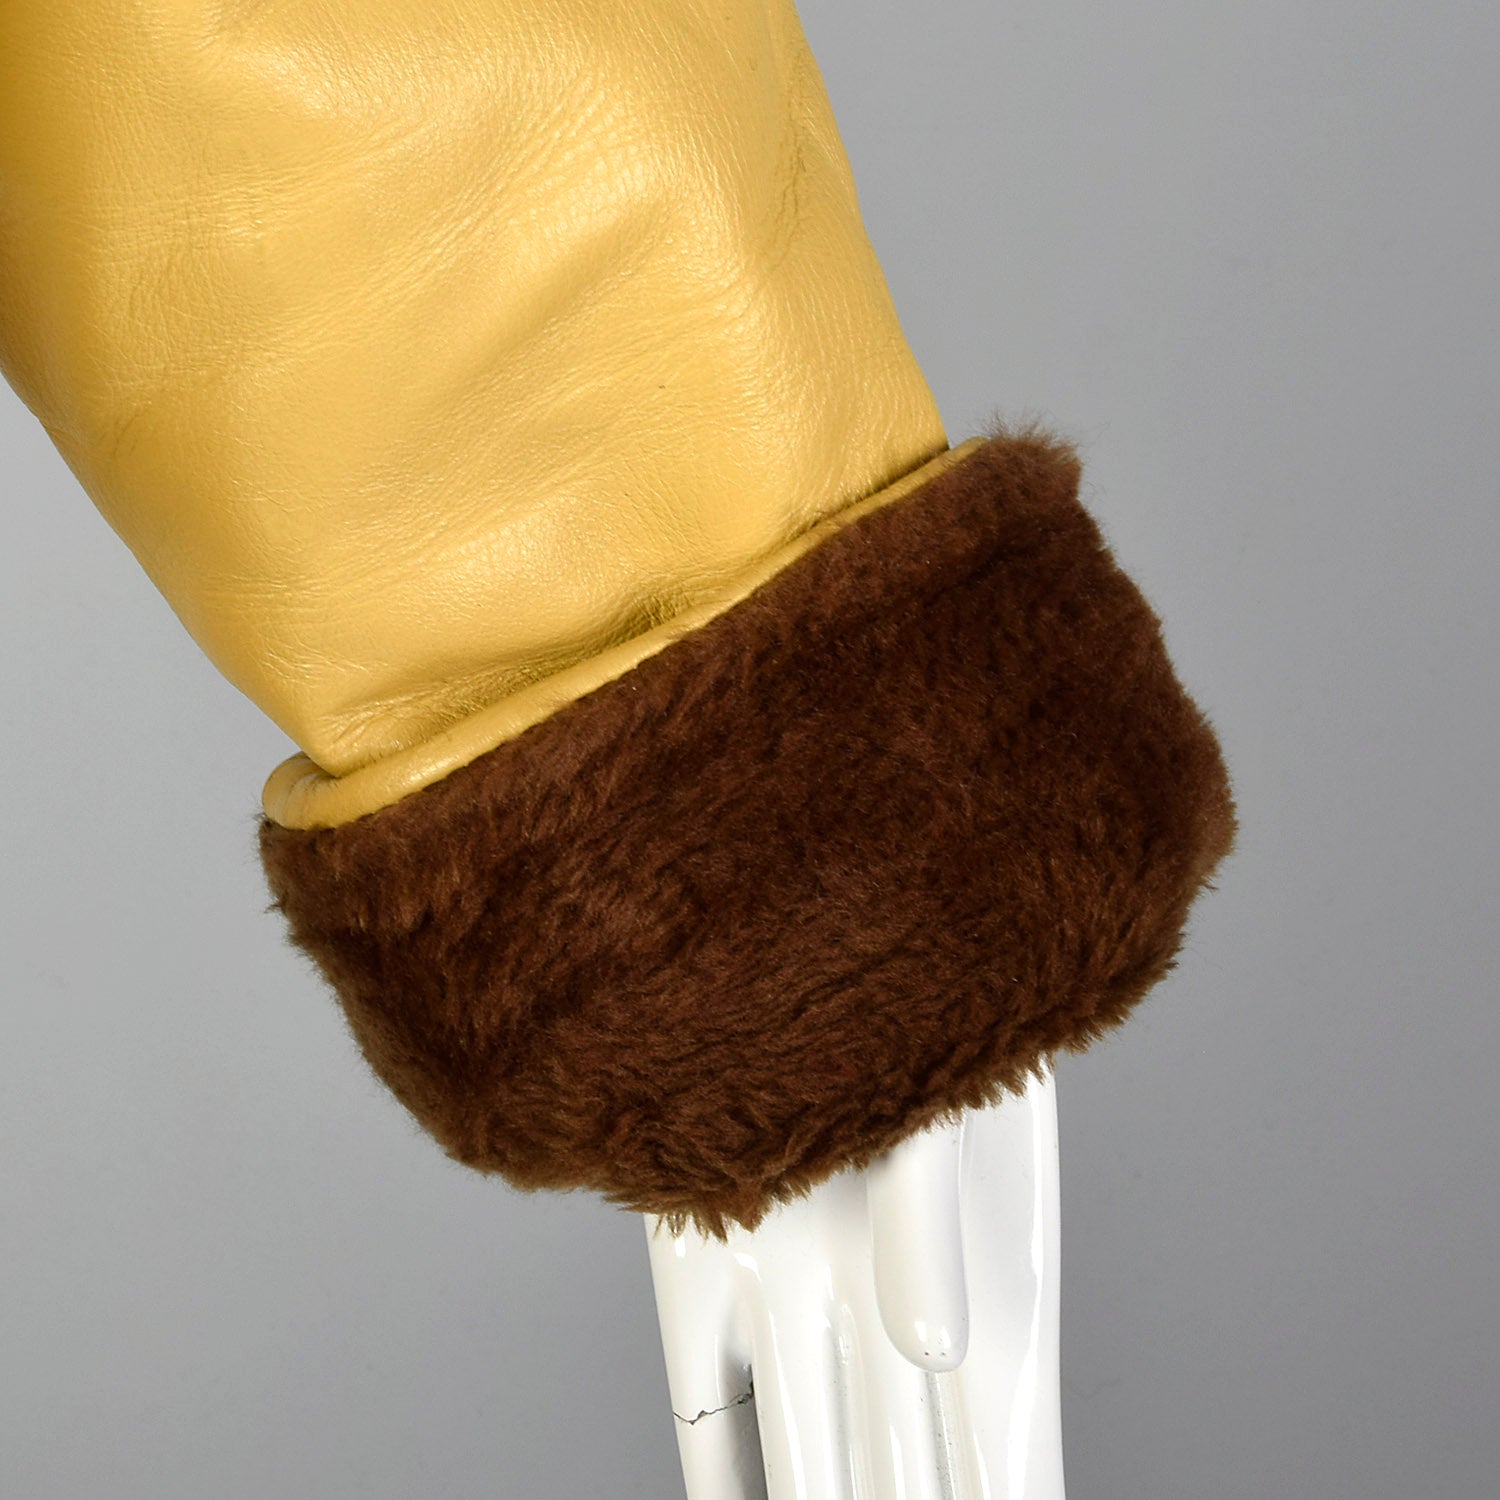 1960s Mustard Yellow Leather Jacket with Brown Faux Fur Trim